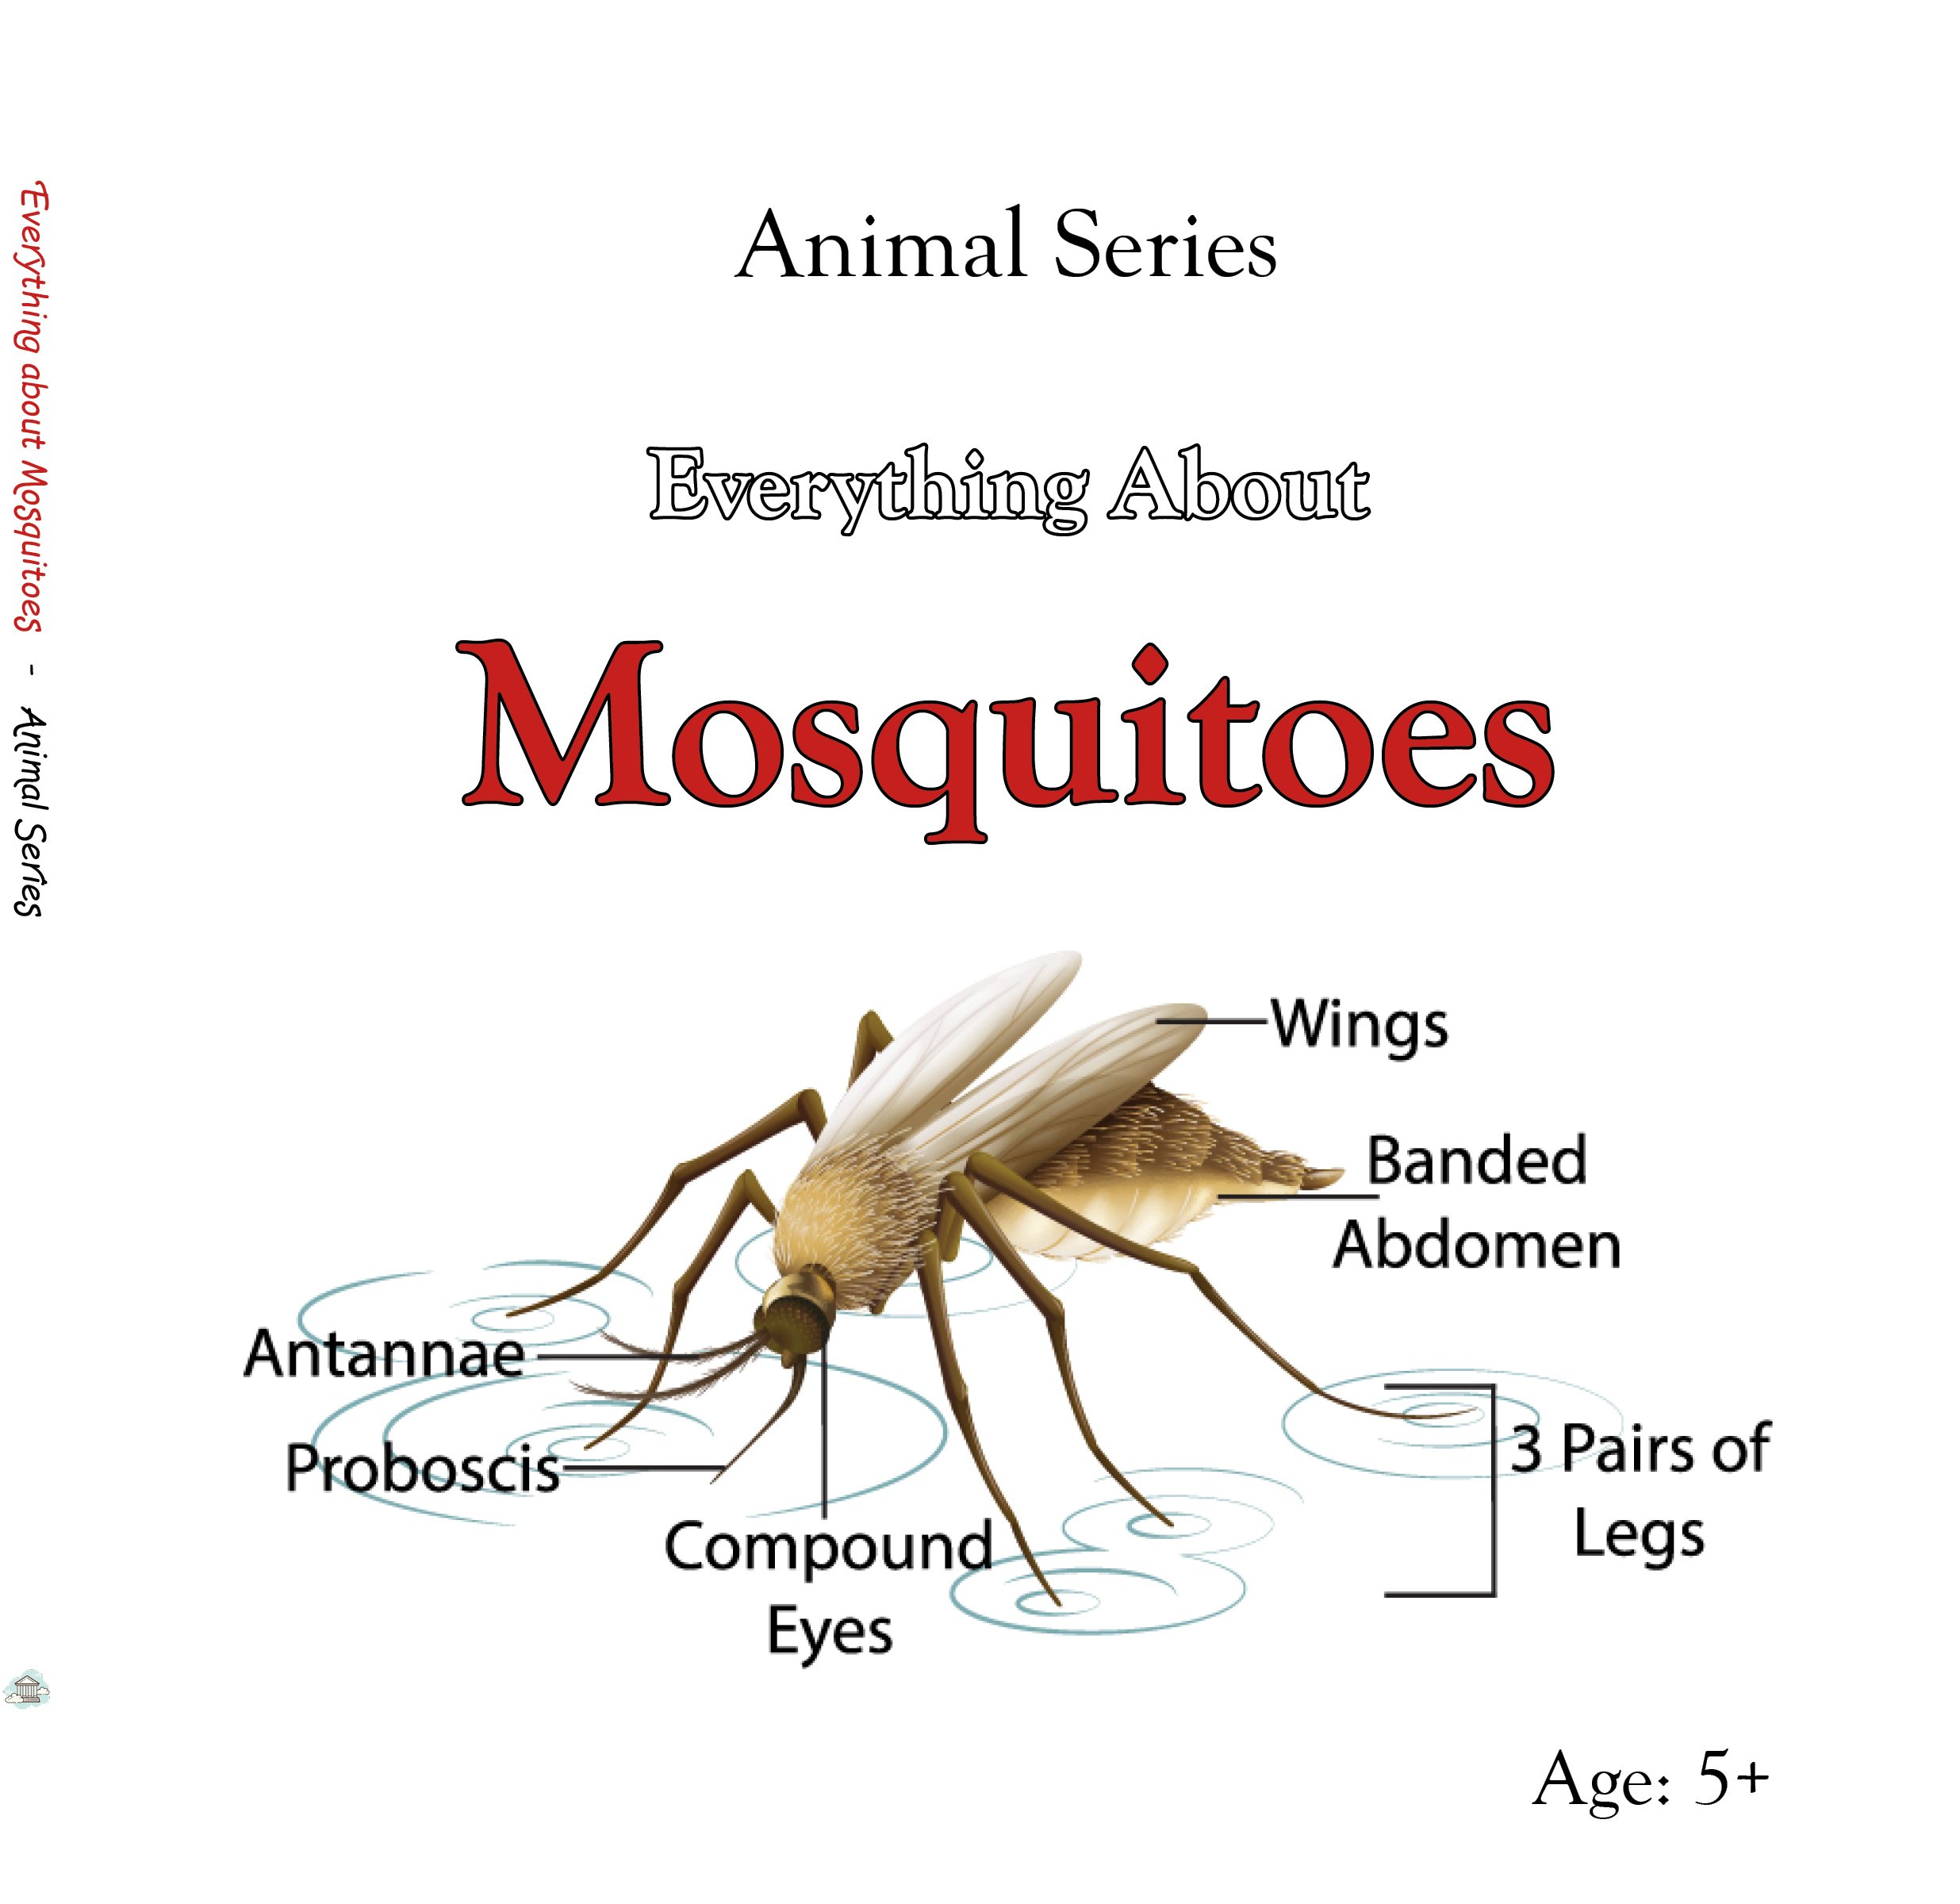 Everything about Mosquitos - Animal Series.jpg